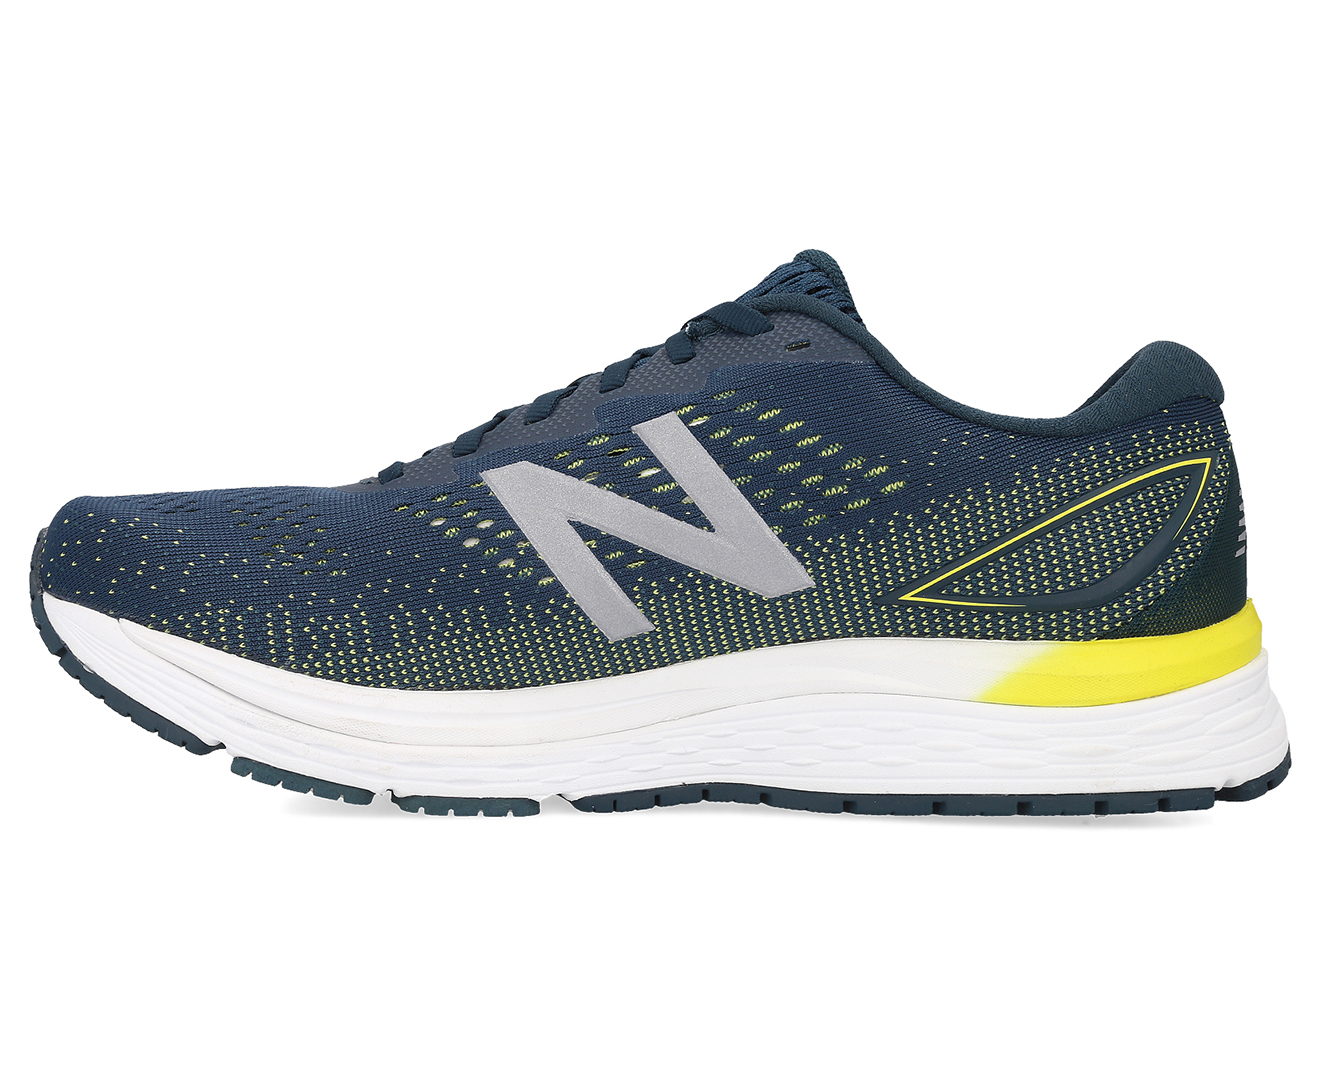 New Balance Men's 880v9 Wide Fit (2E) Running Shoes - Blue/Yellow ...